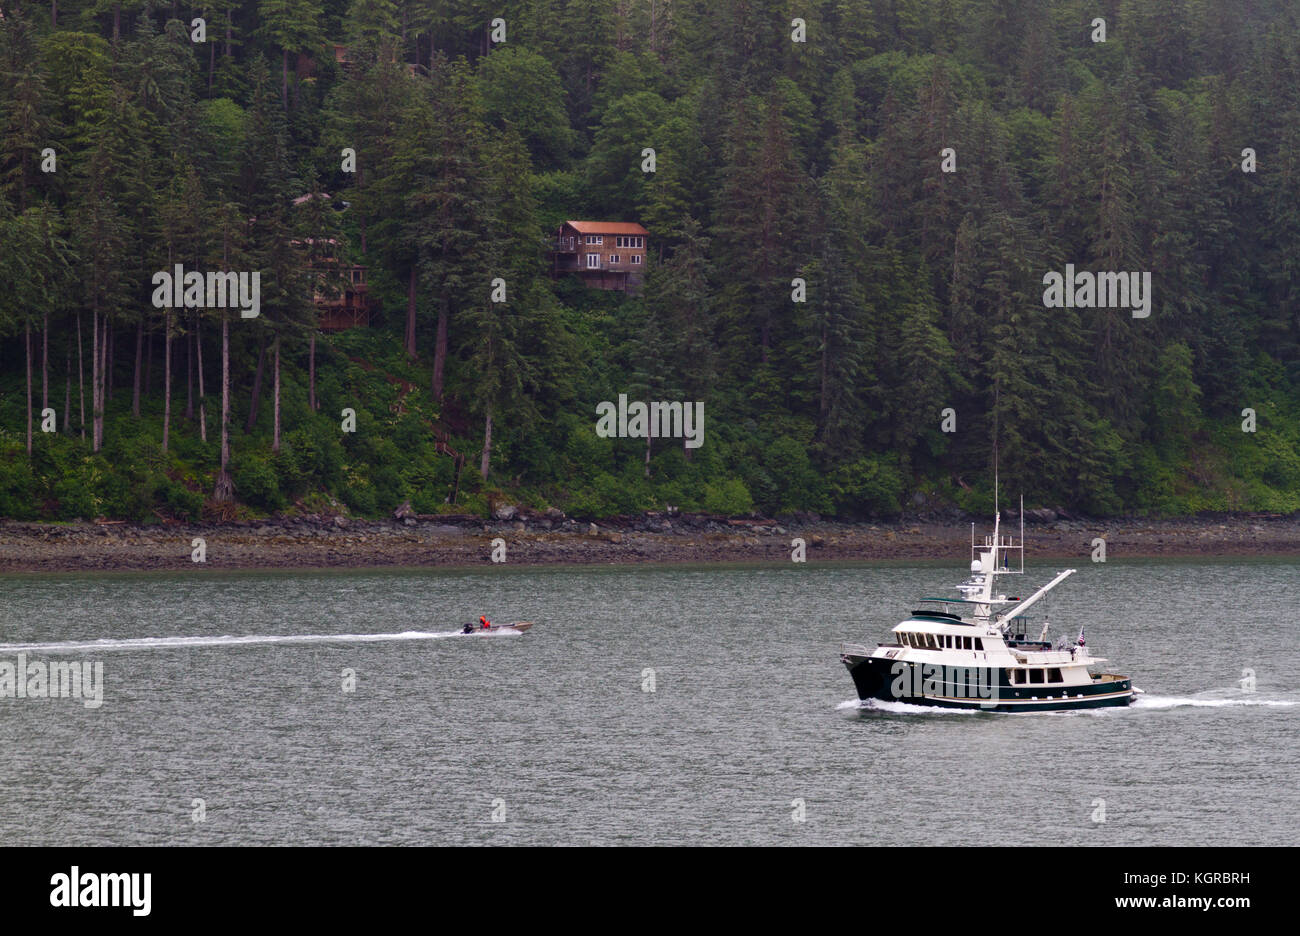 Two men in an outboard motorboat passing a fishing boat along the Alaskan coast near Ketchikan with secluded houses in forest in the background. Stock Photo